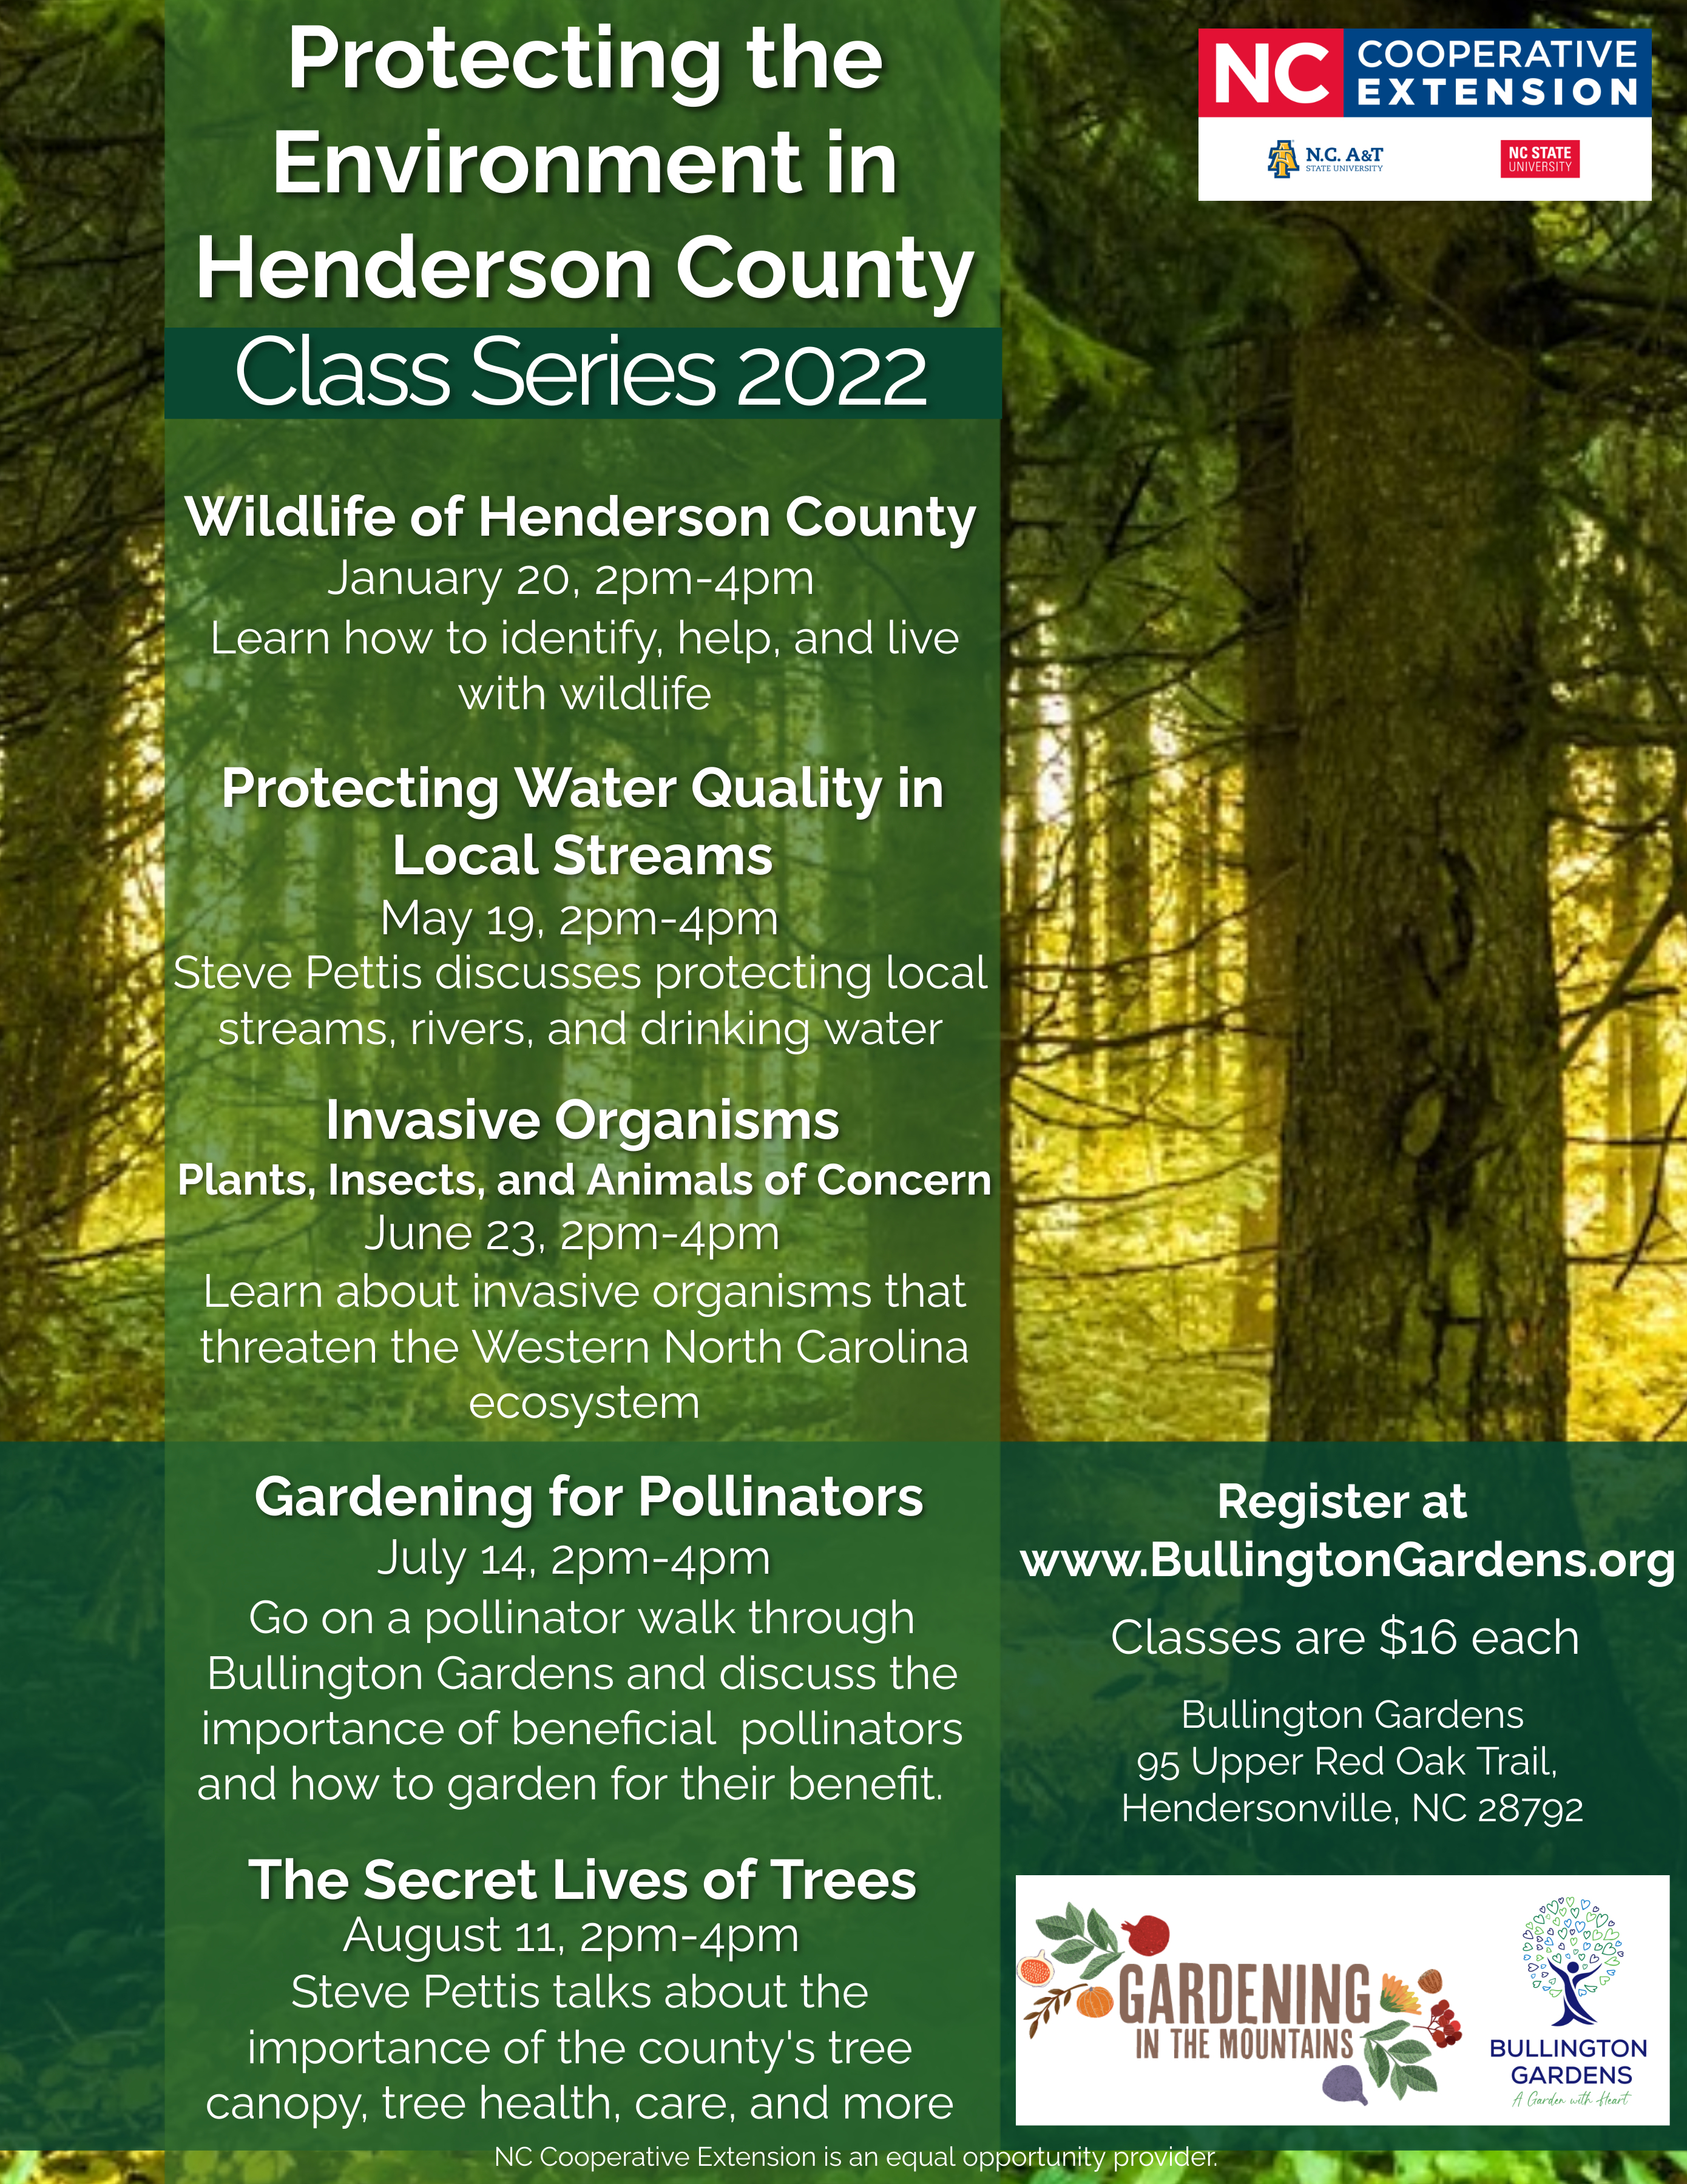 Protecting the Environment in Henderson County series flyer